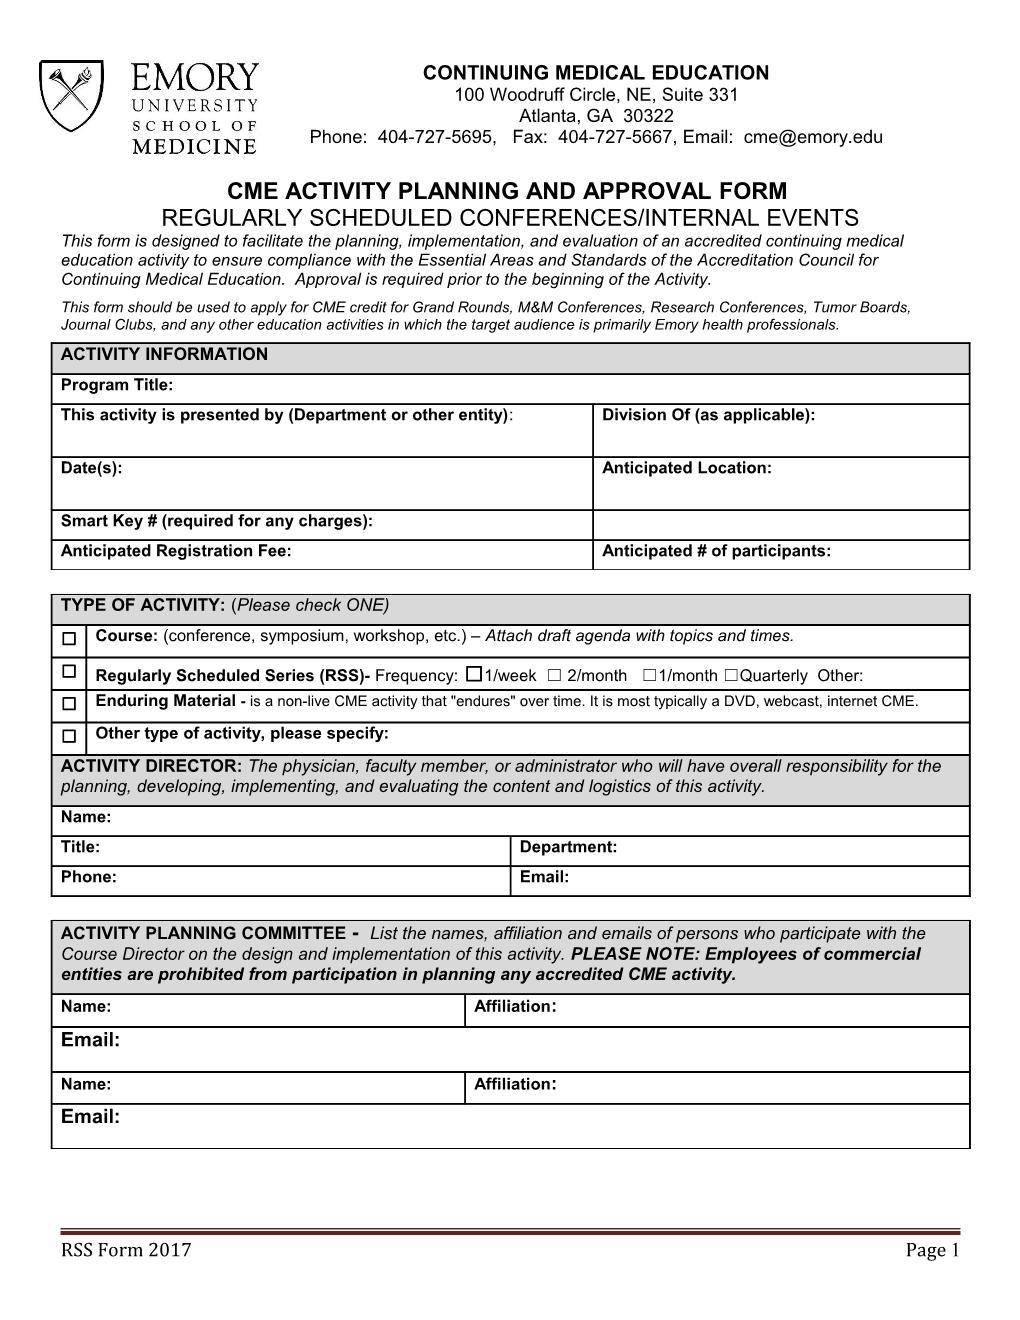 Cme Activity Planning and Approval Form